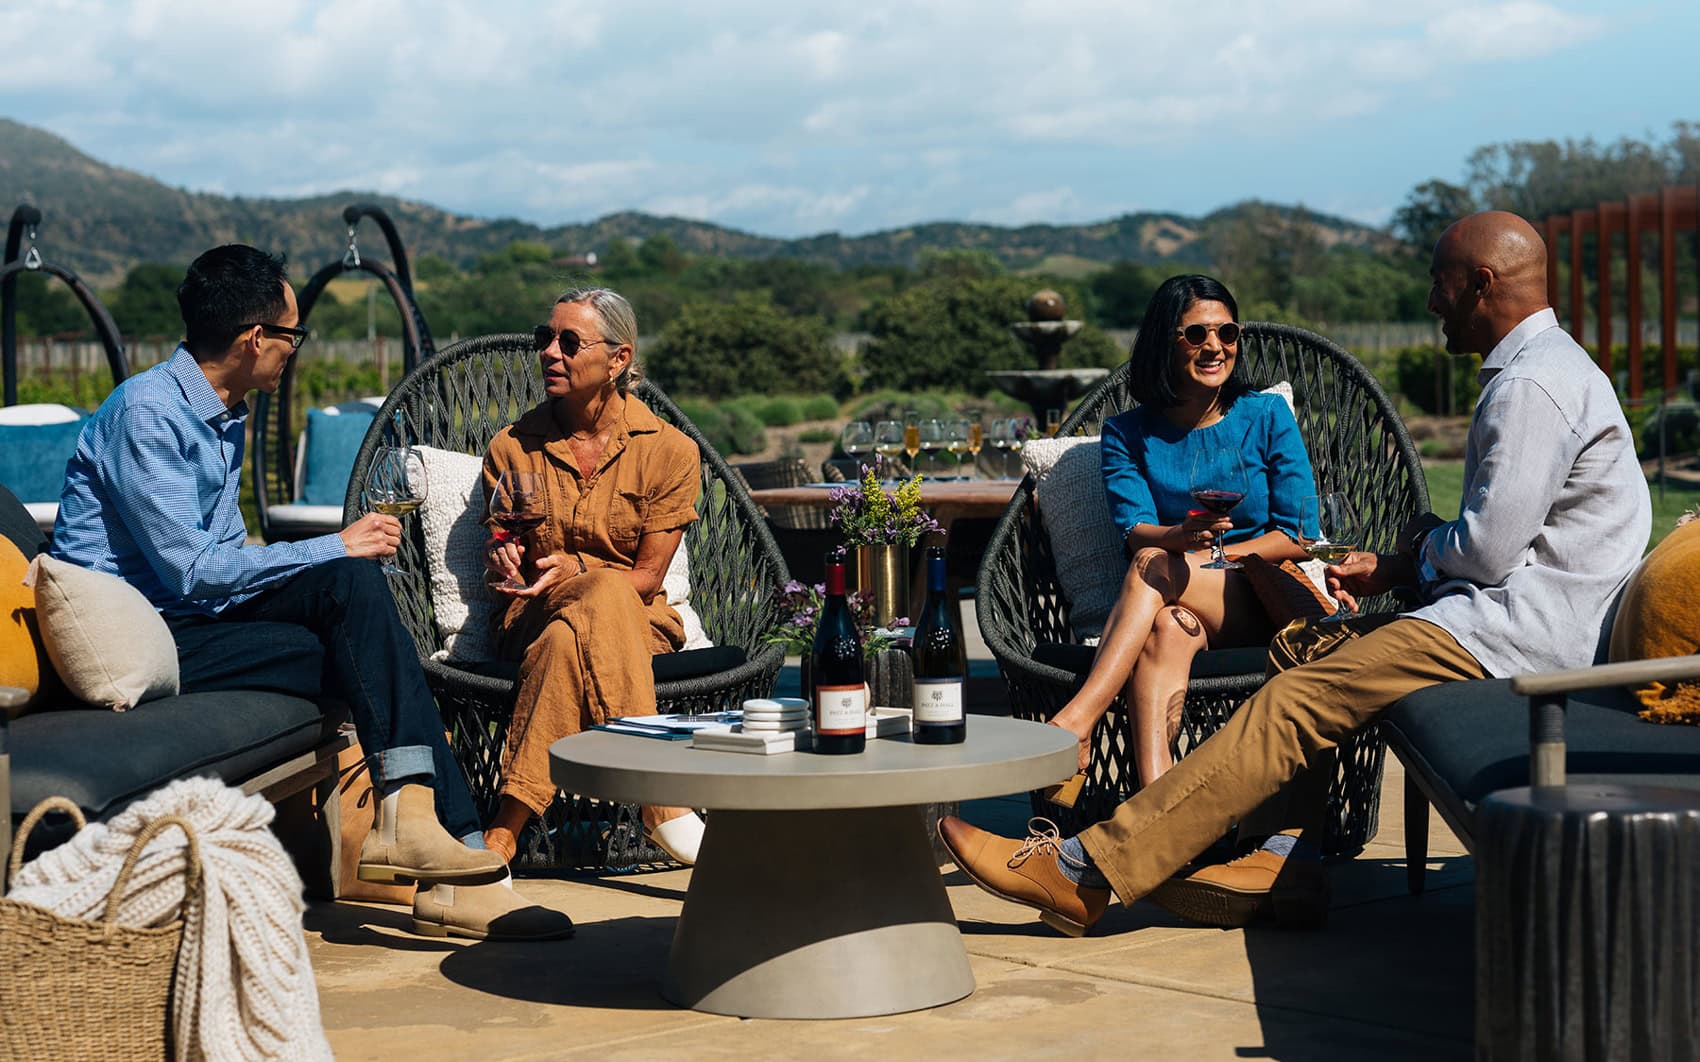 Four individuals sit outdoors at a round table adorned with wine bottles and glasses. They are engaged in conversation and enjoying drinks. The background features green hills and a partly cloudy sky. They are seated on comfortable, modern patio furniture, suggesting a relaxed and social atmosphere.